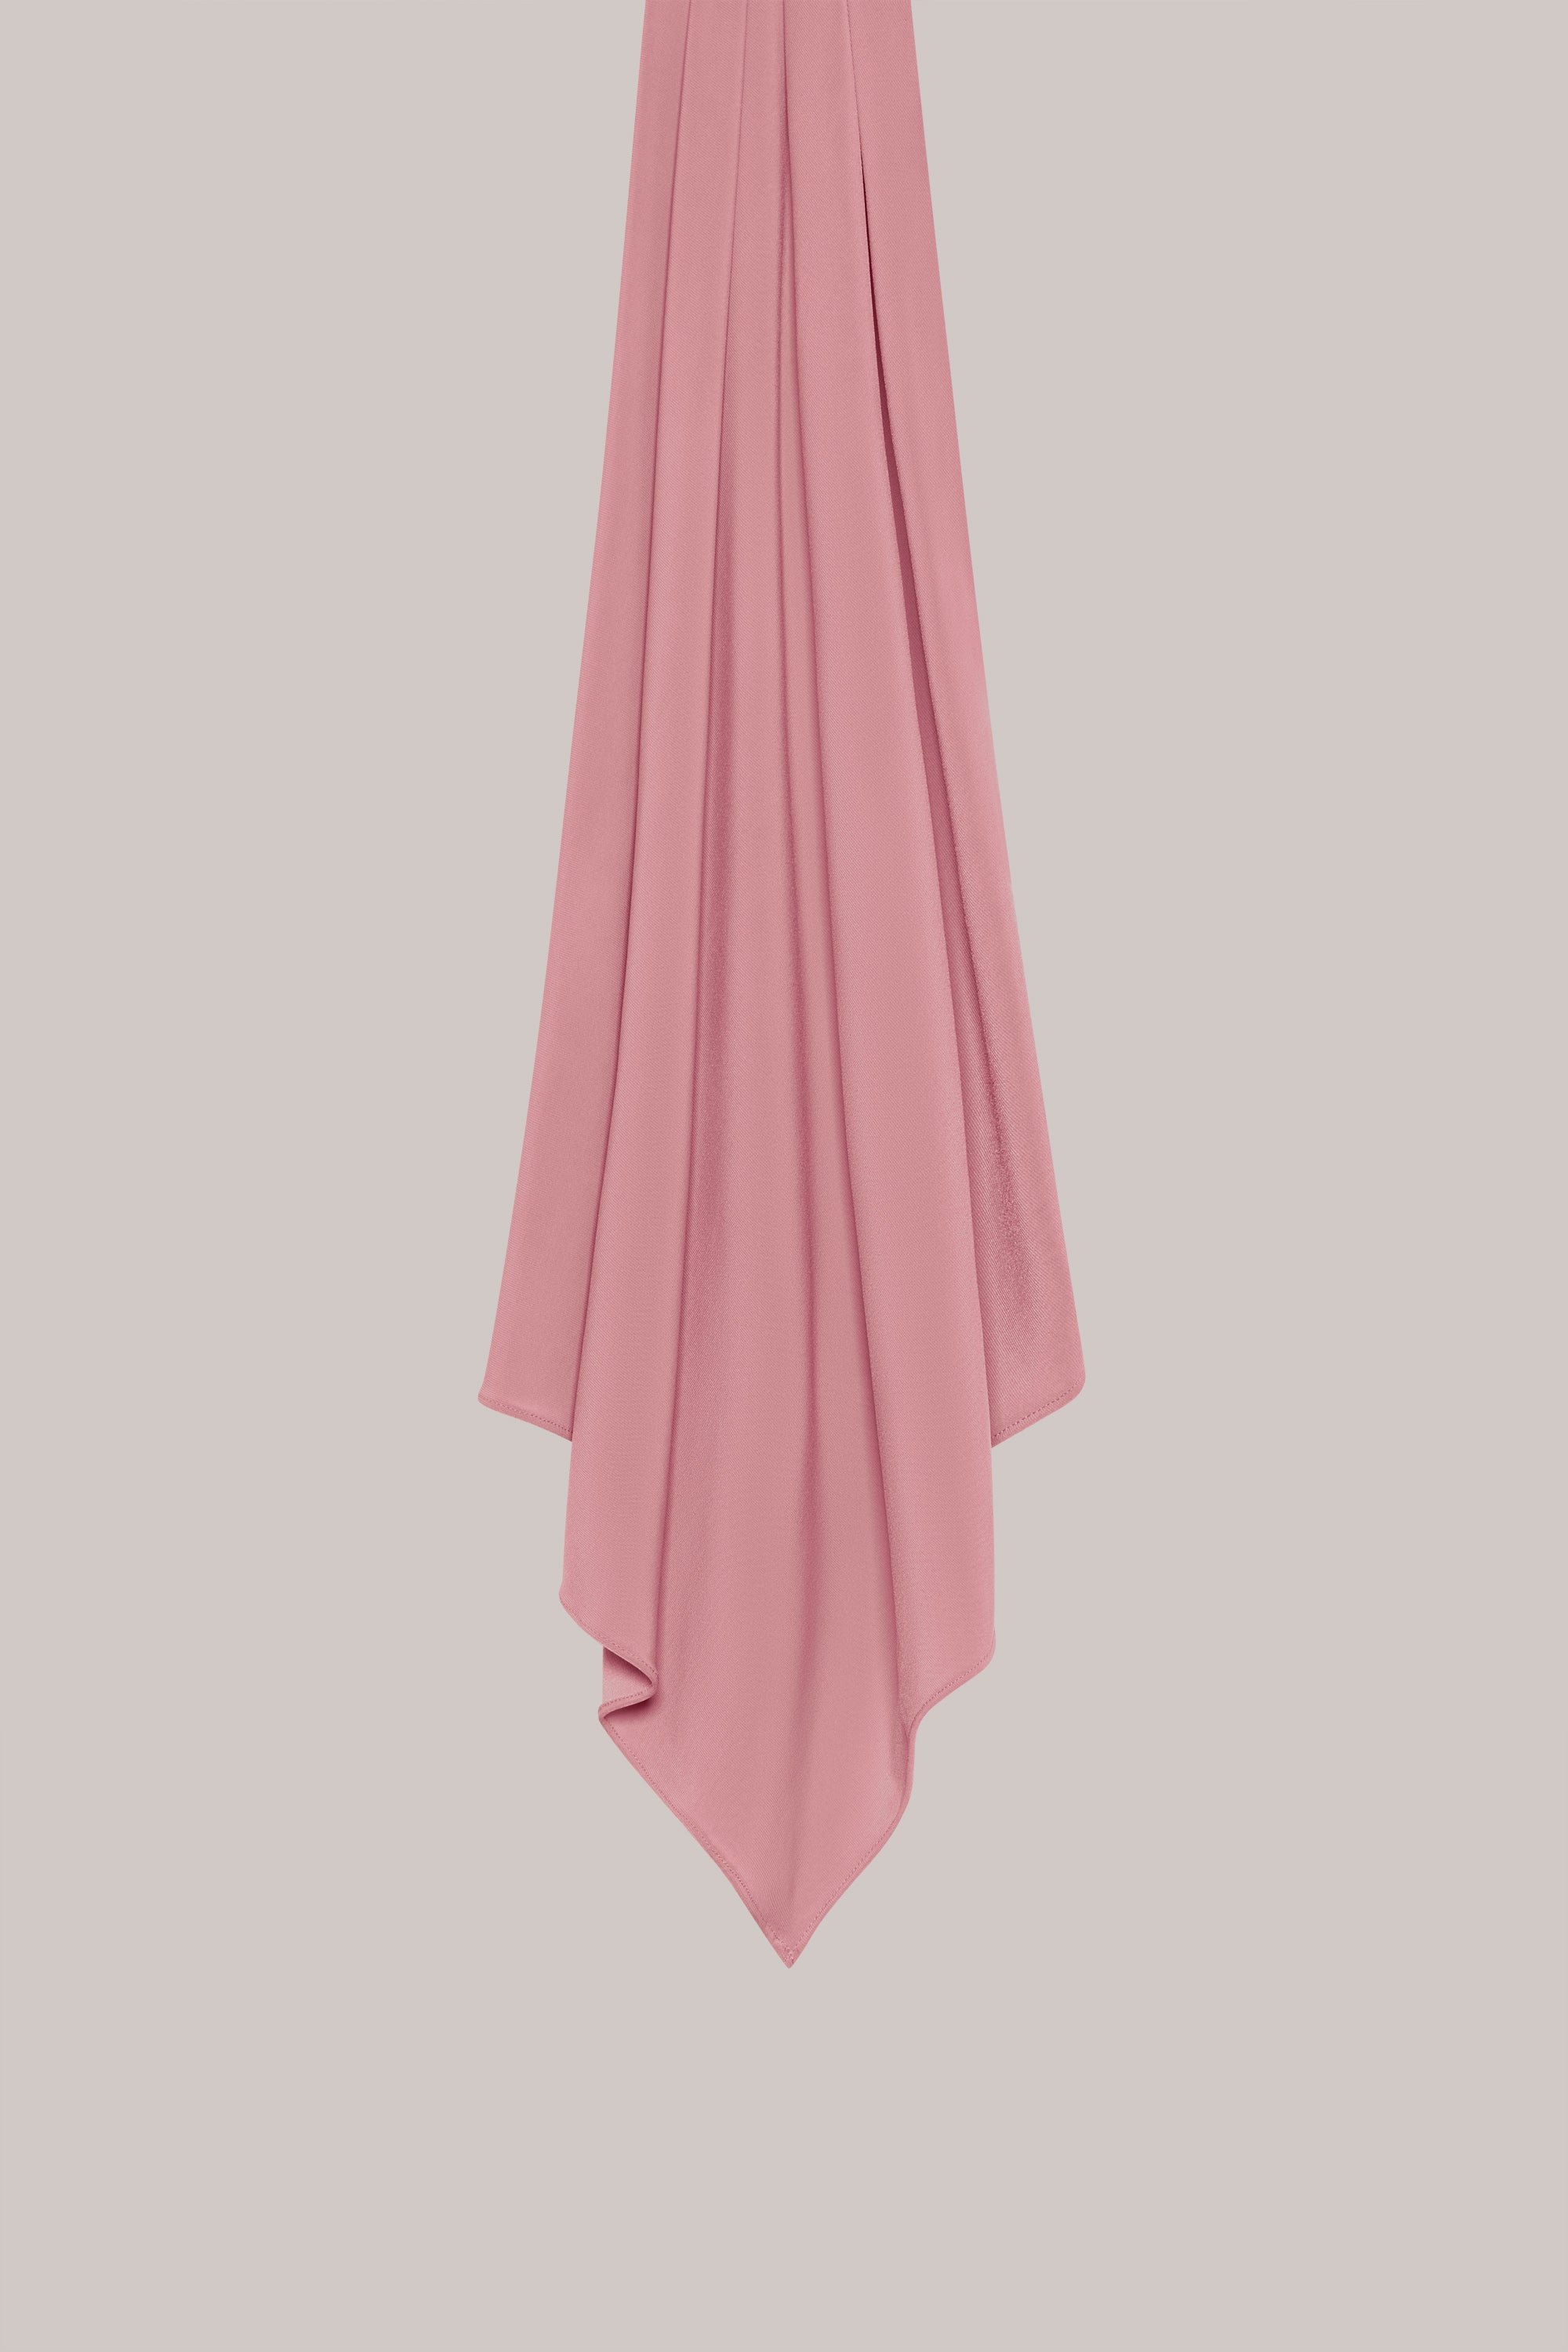 BREATHABLE JERSEY SCARF - DUSTY PINK